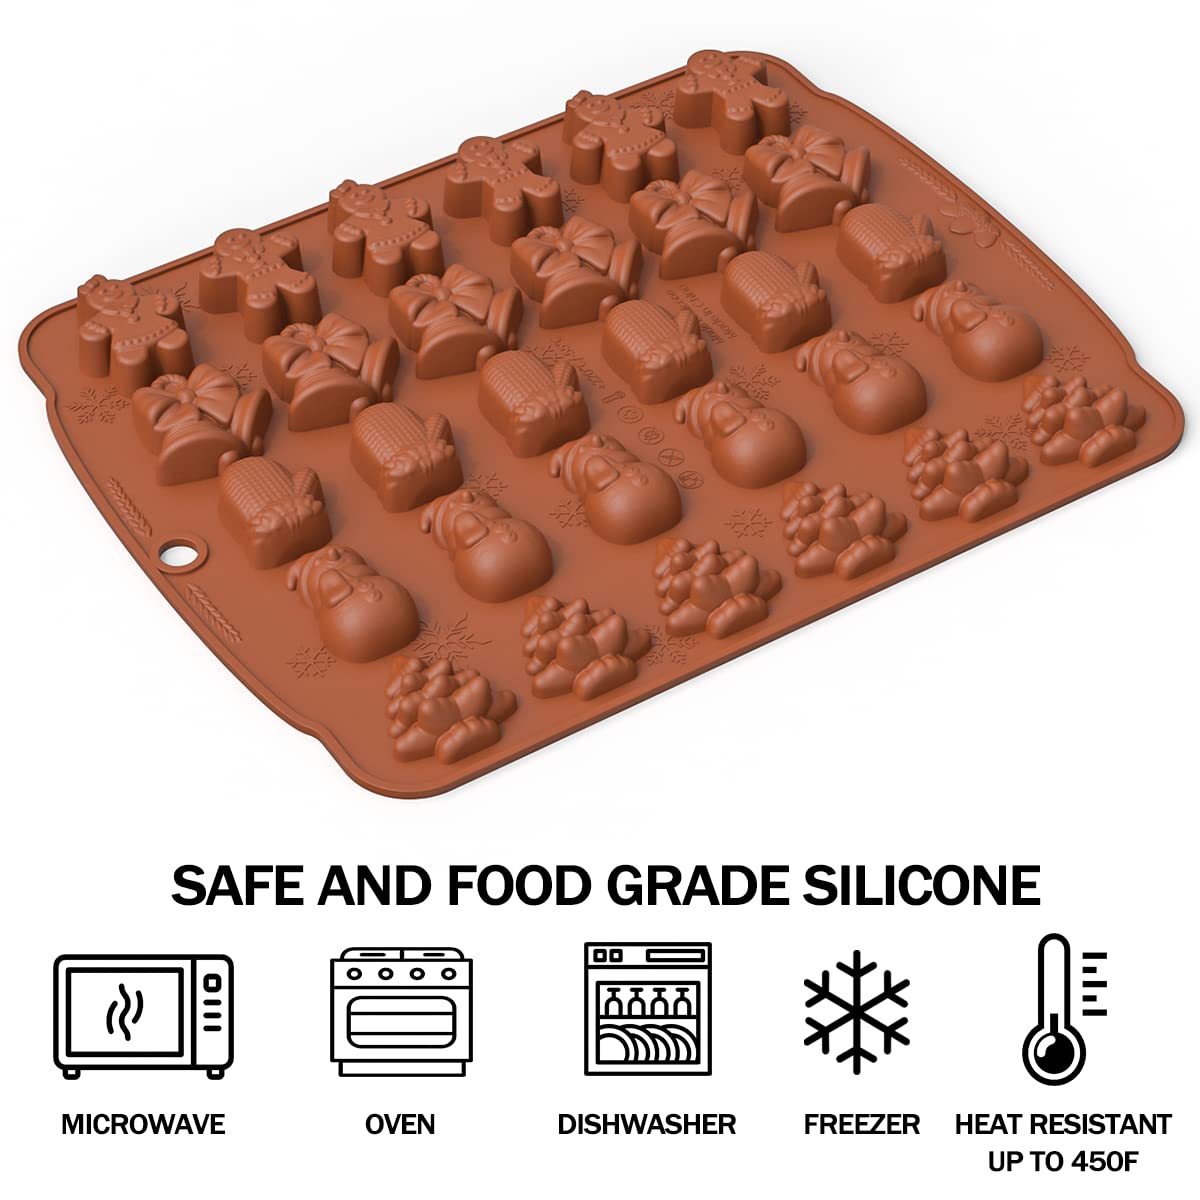 Christmas Candy Silicone 3D Mould,gingerbread man, bells, gloves, snowman, christmas tree 30 Cavity candy mold, for Christmas Party, Ice Cubes, Chocolate, Jelly, Candy.(2-pack of molds + 1 droppers)